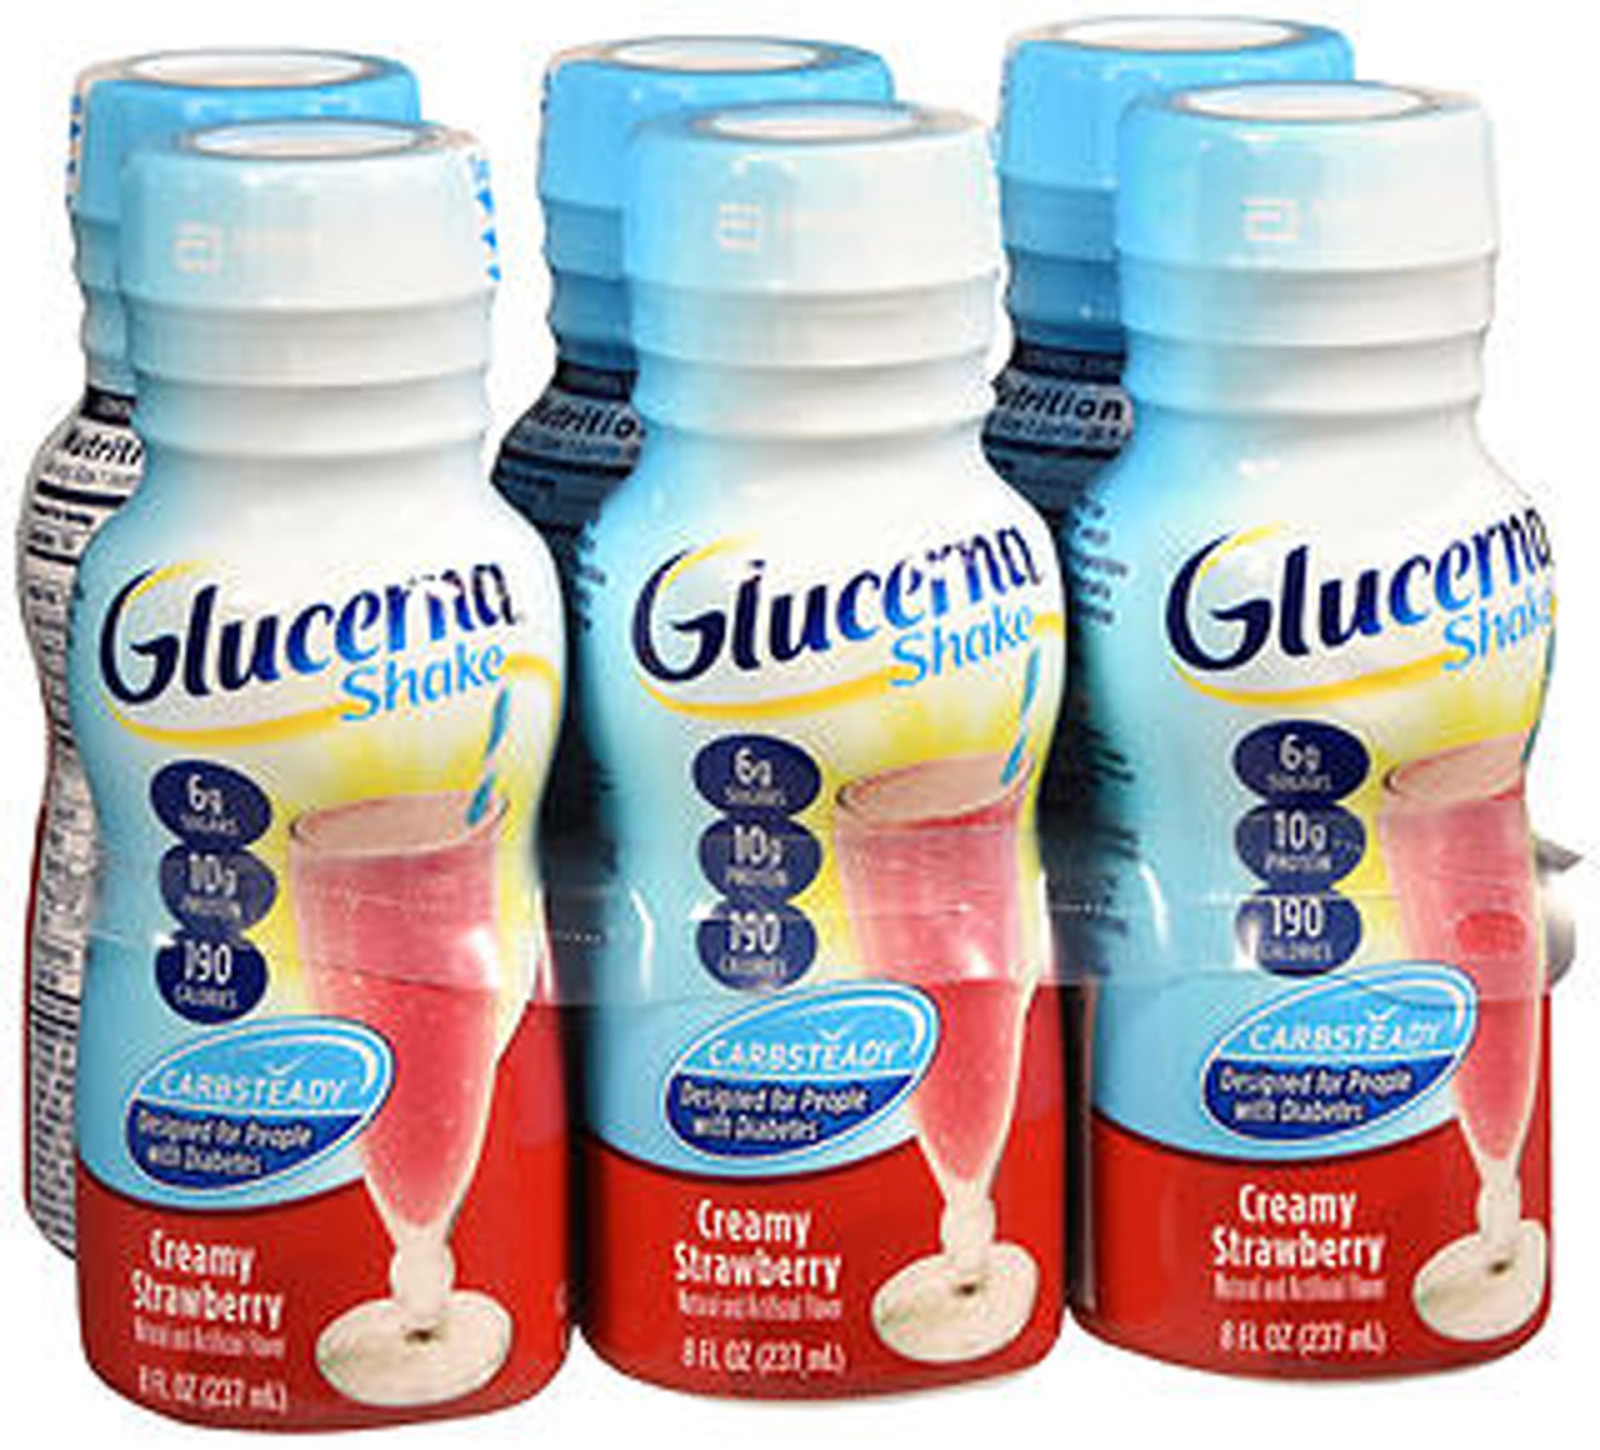 Glucerna shakes for weight support